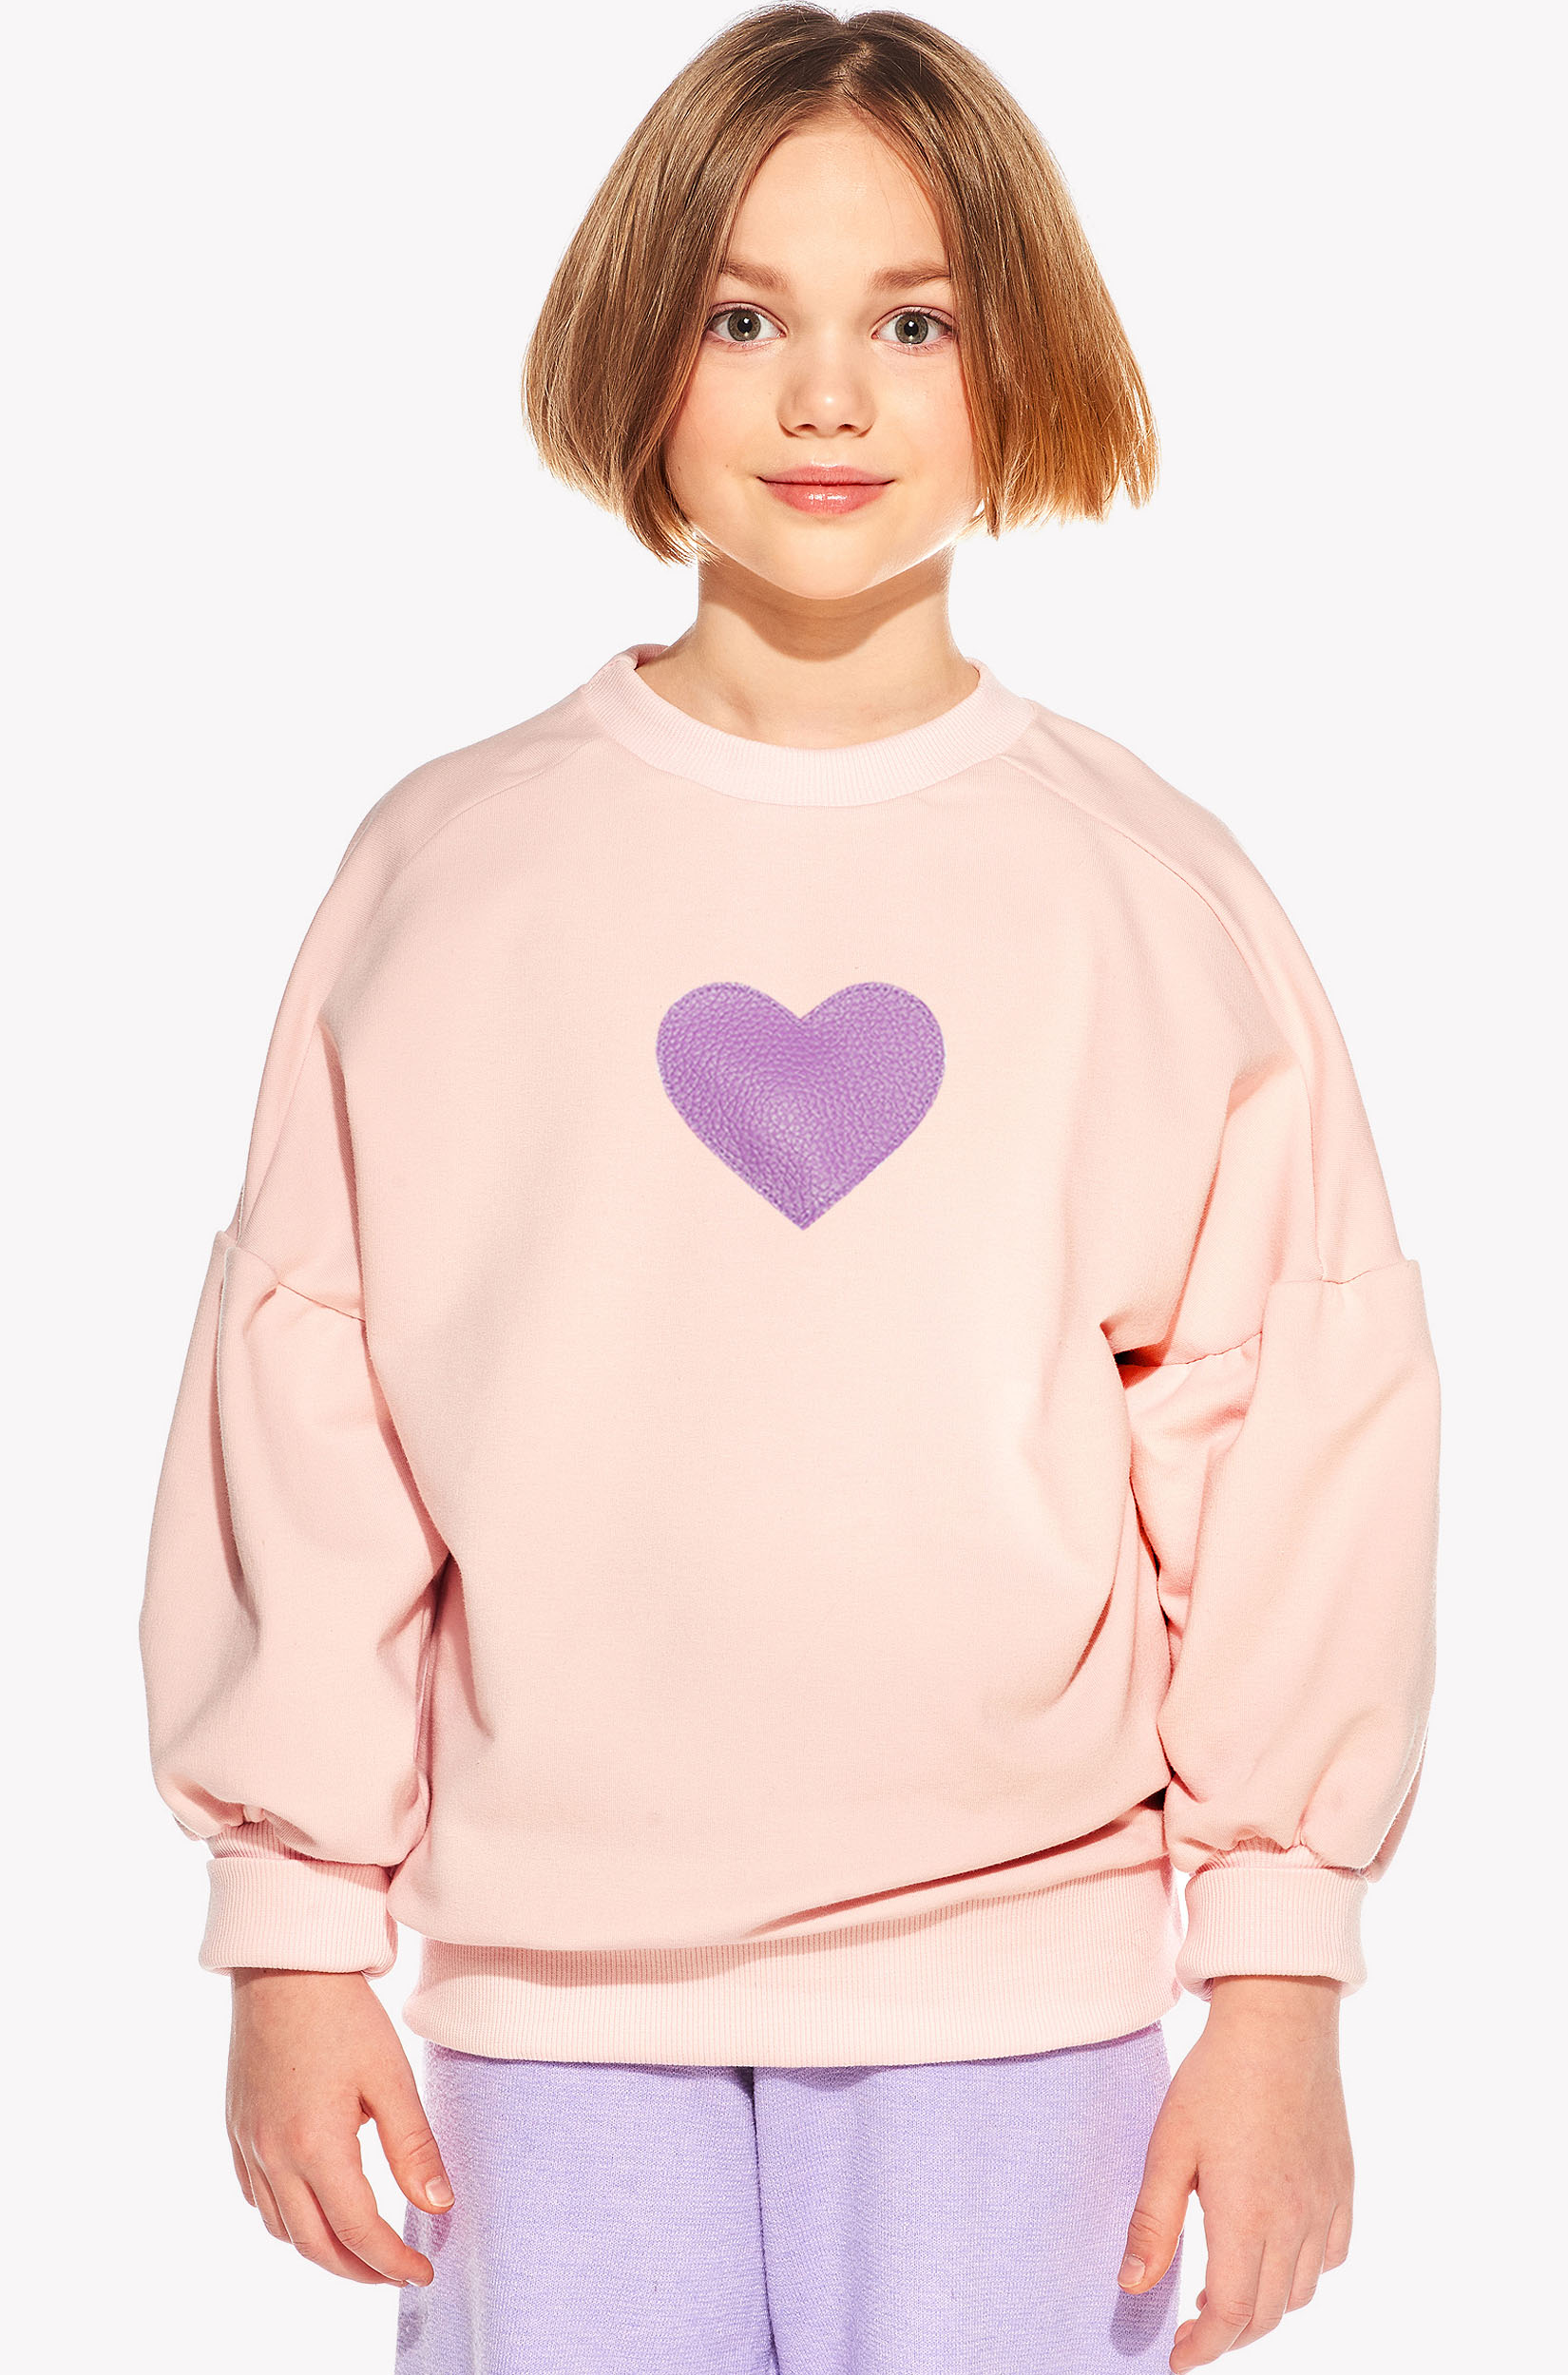 Hoodie with heart